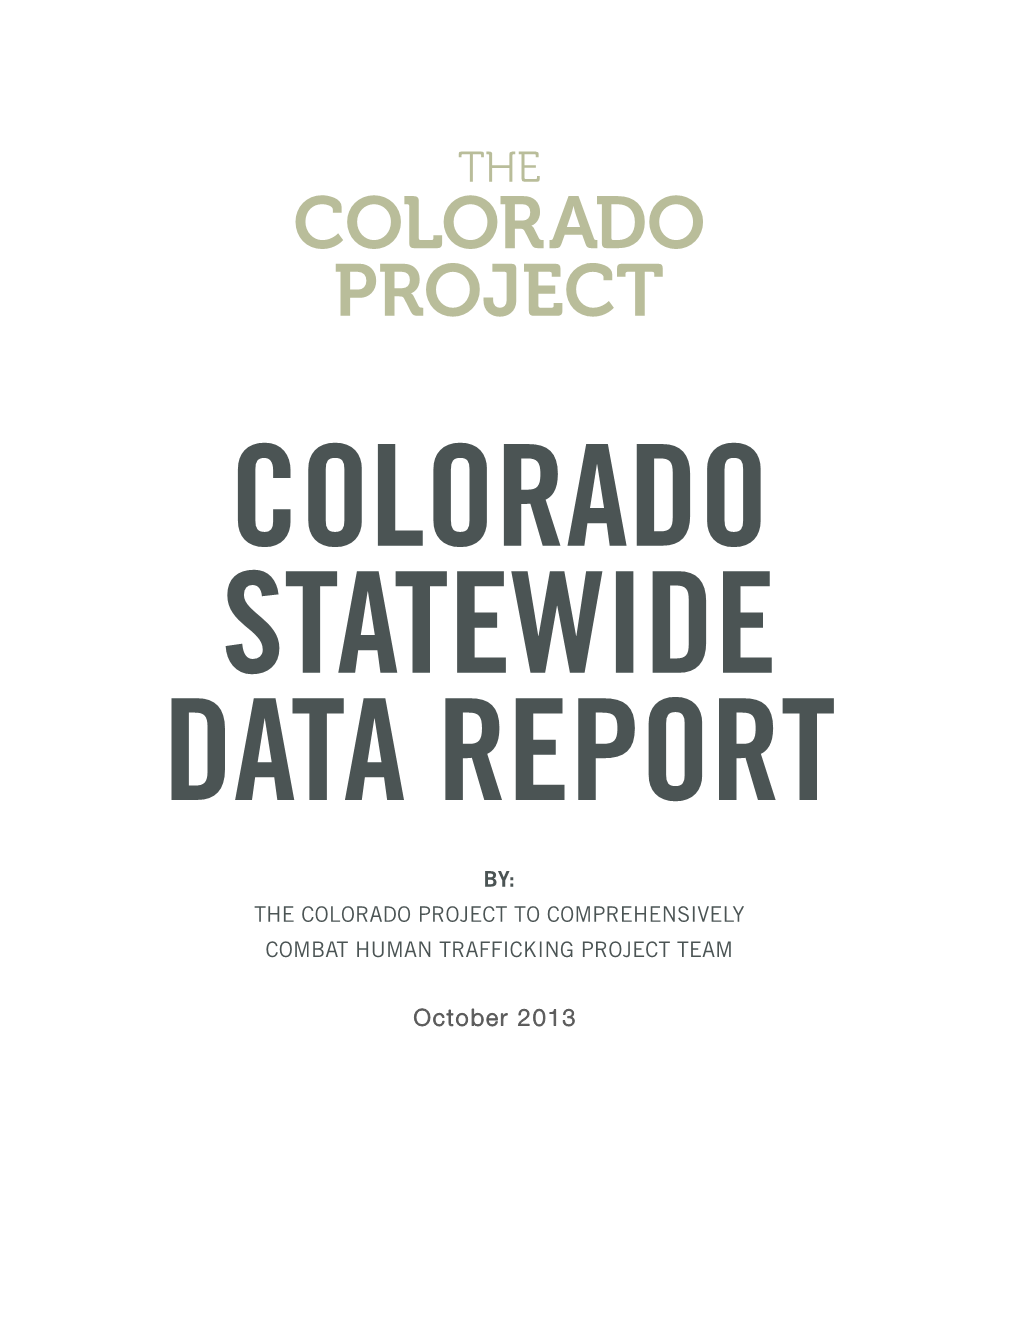 Statewide Data Report (PDF)